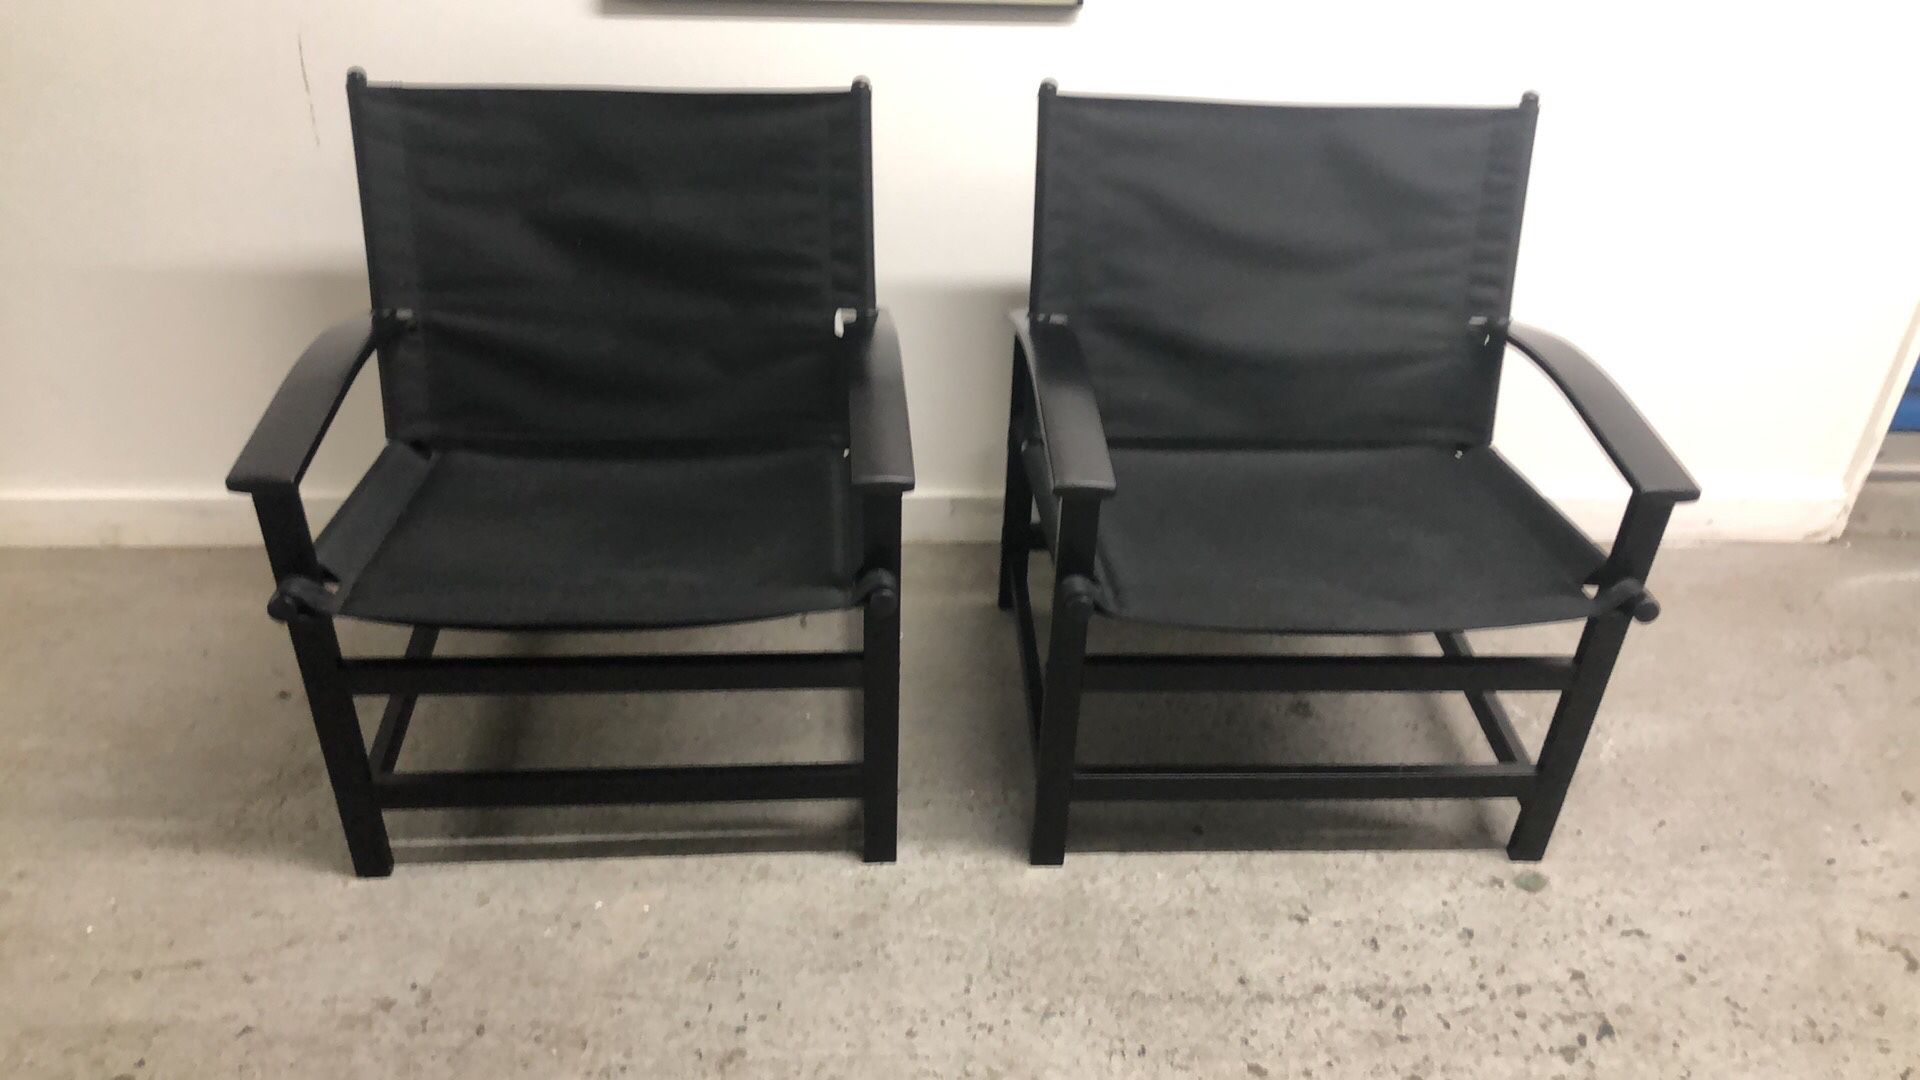 26”wx21”d 2 Metal Chairs good condition very strong